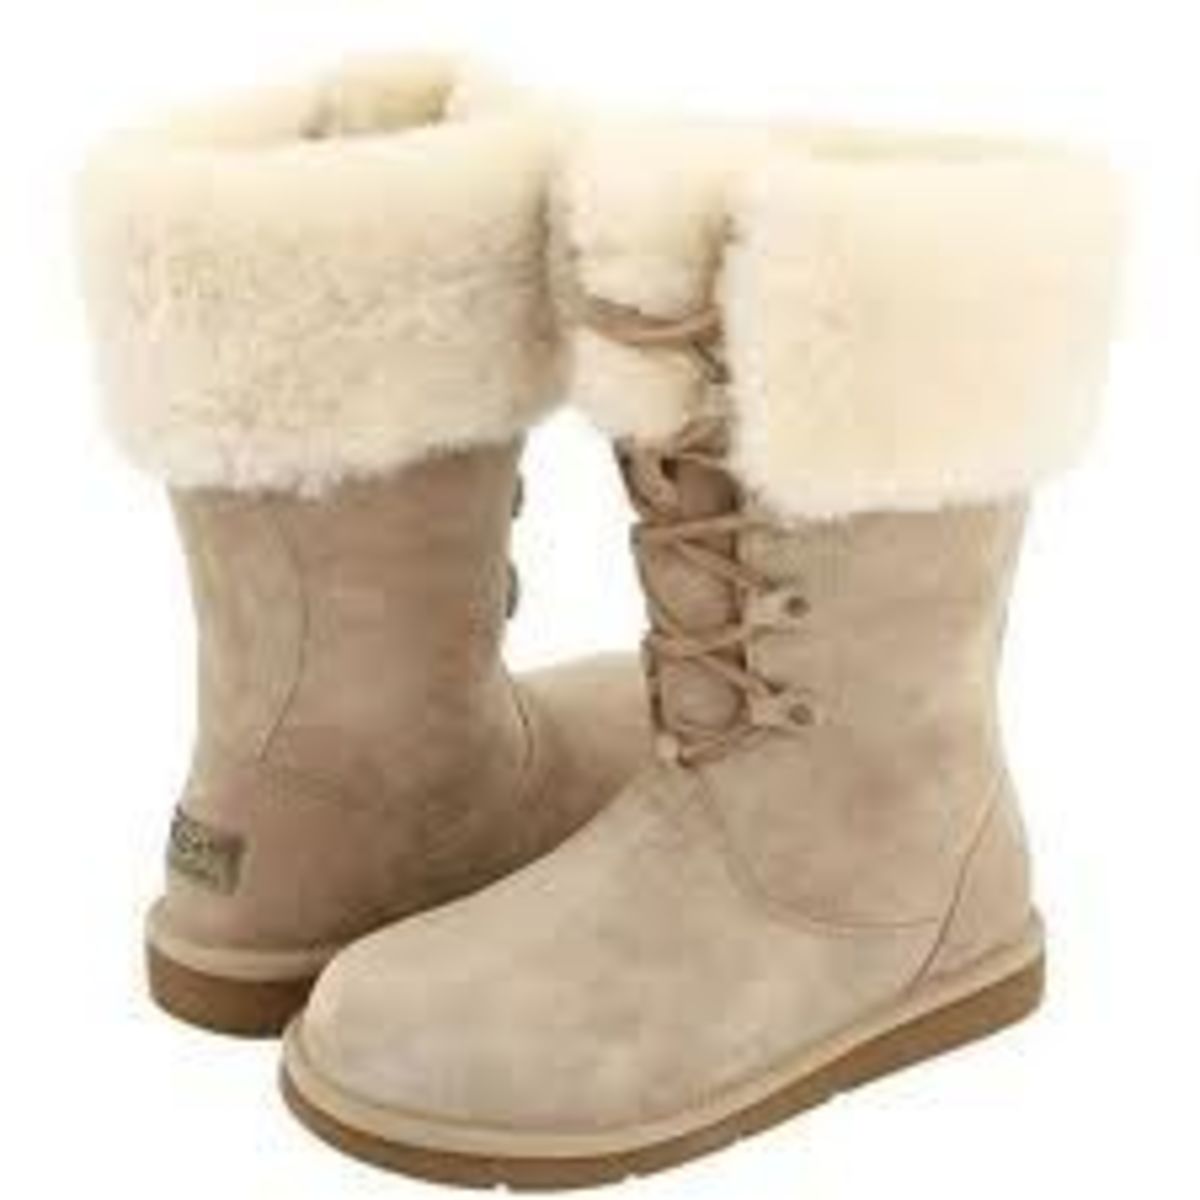 how to clean the inside of uggs without ruining them